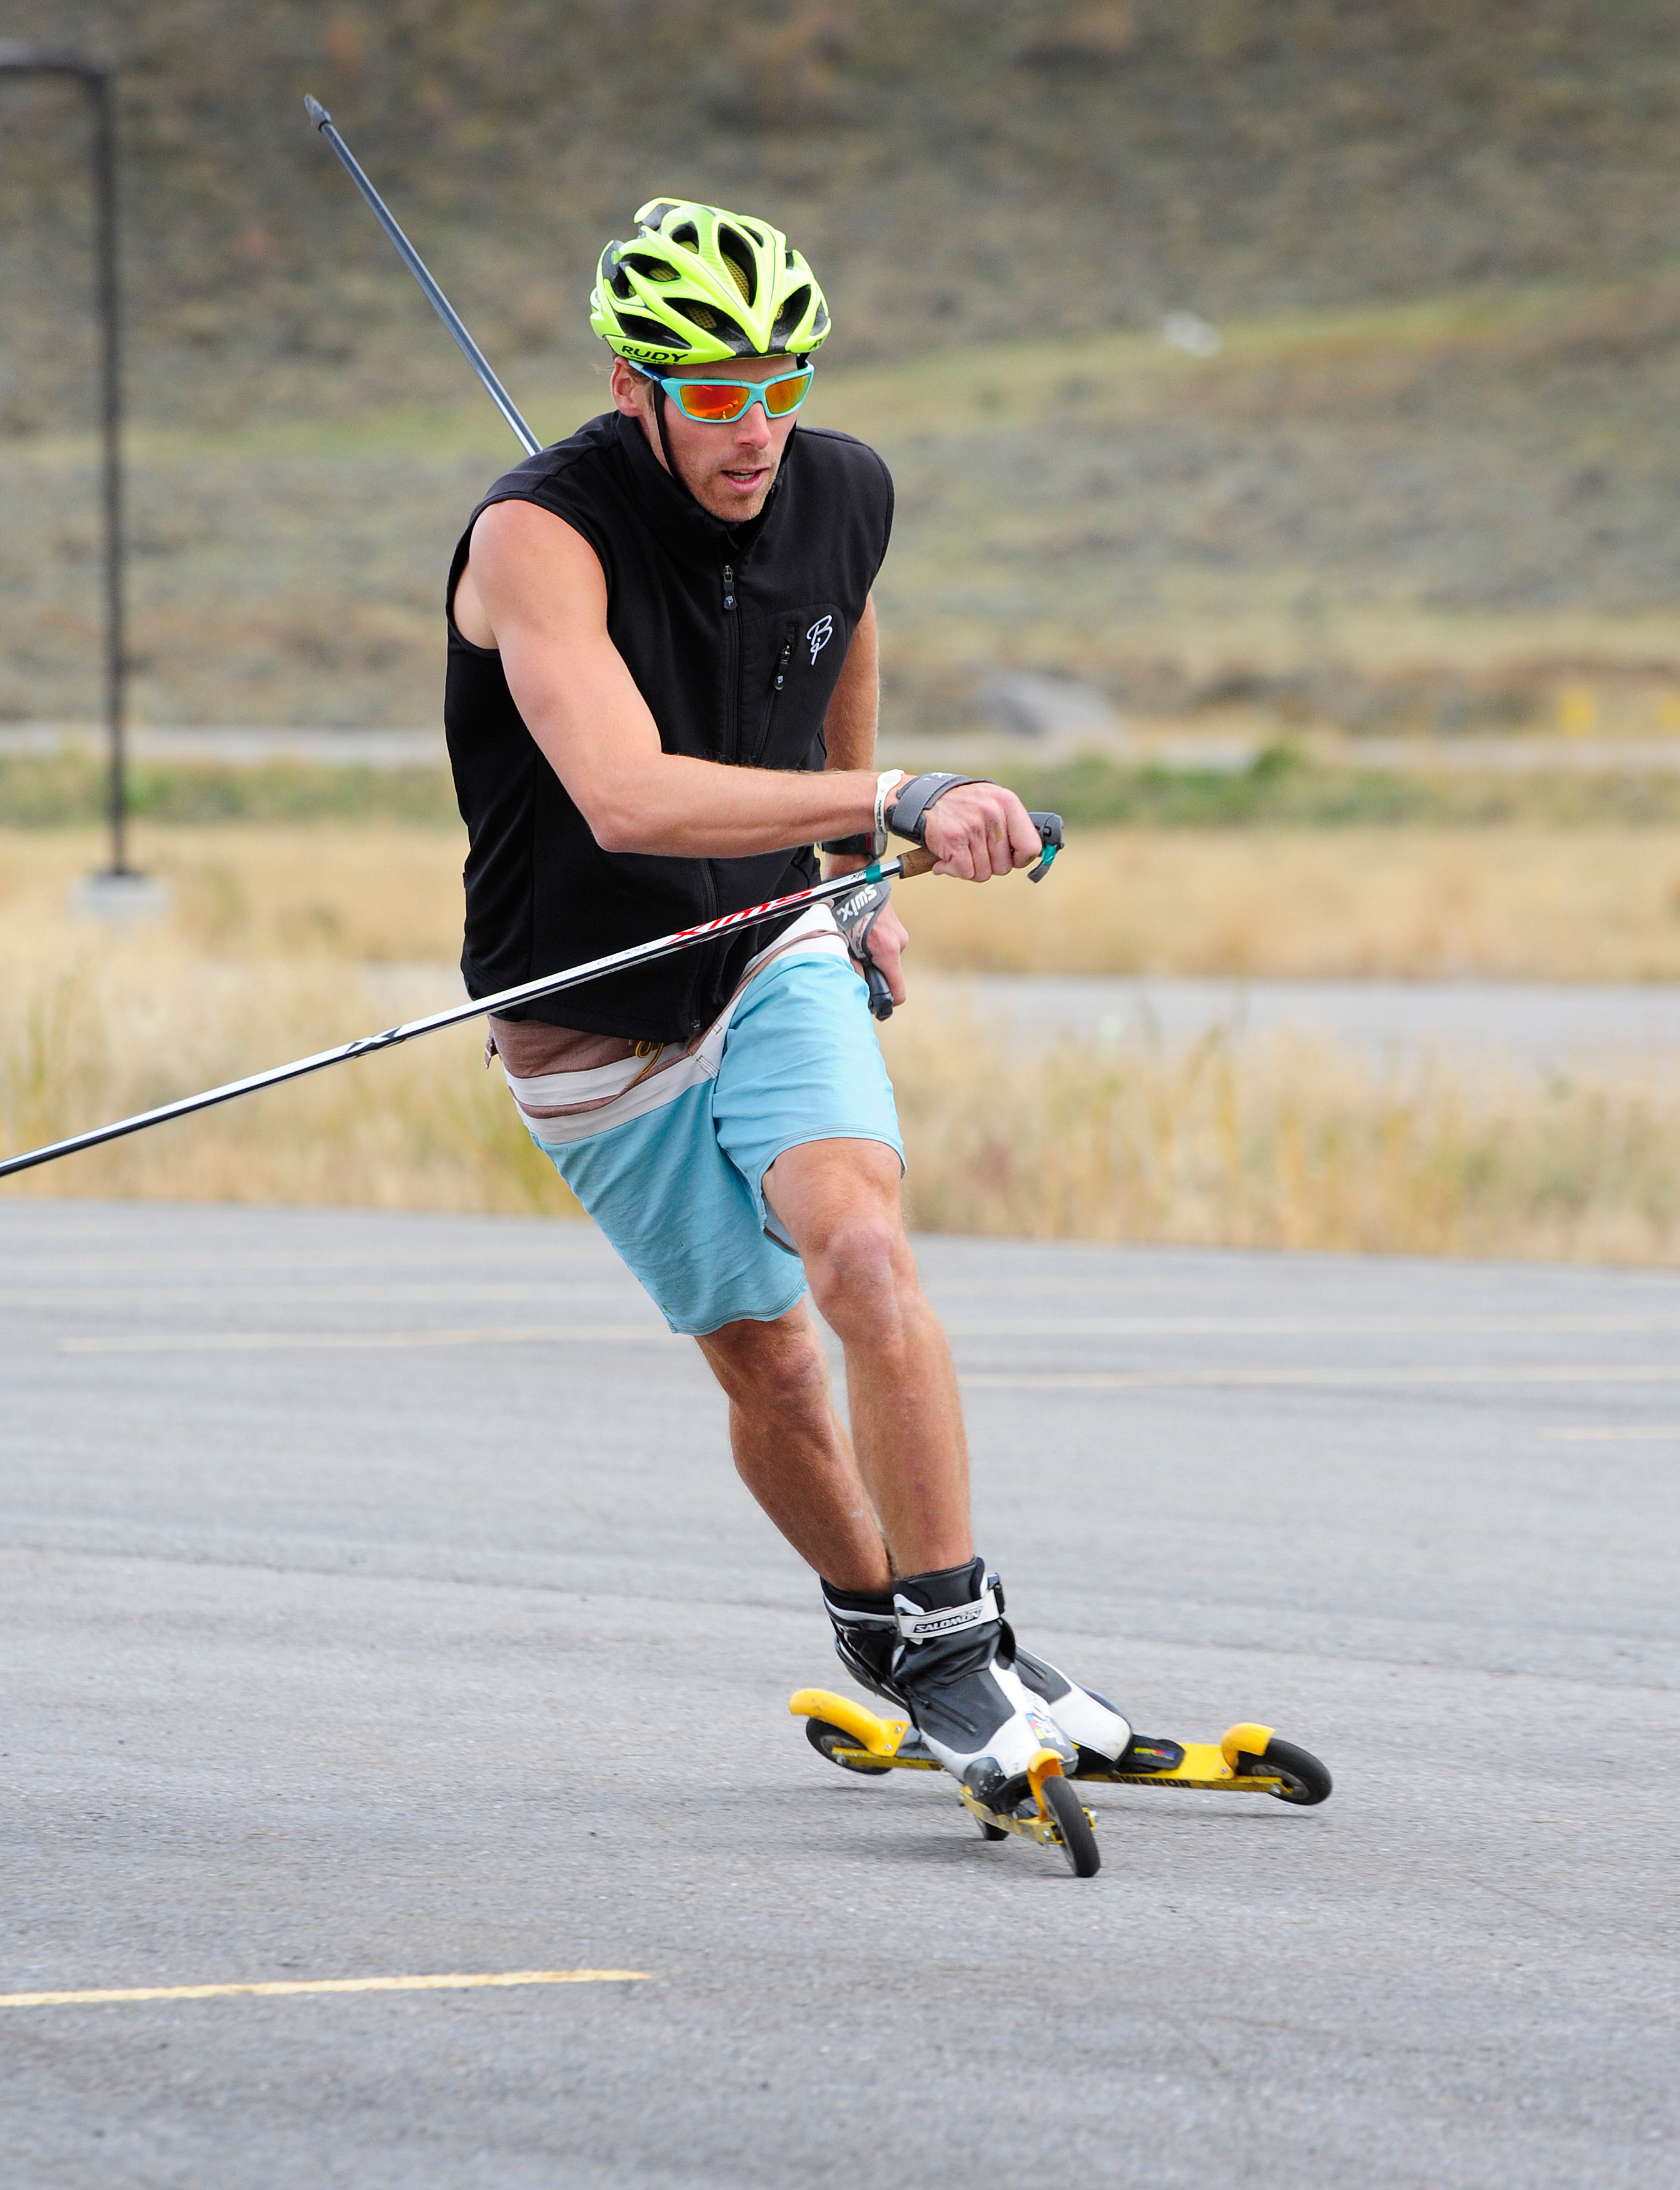 Andy Newell – Roller Skiing Agility Drills Jessie Diggins